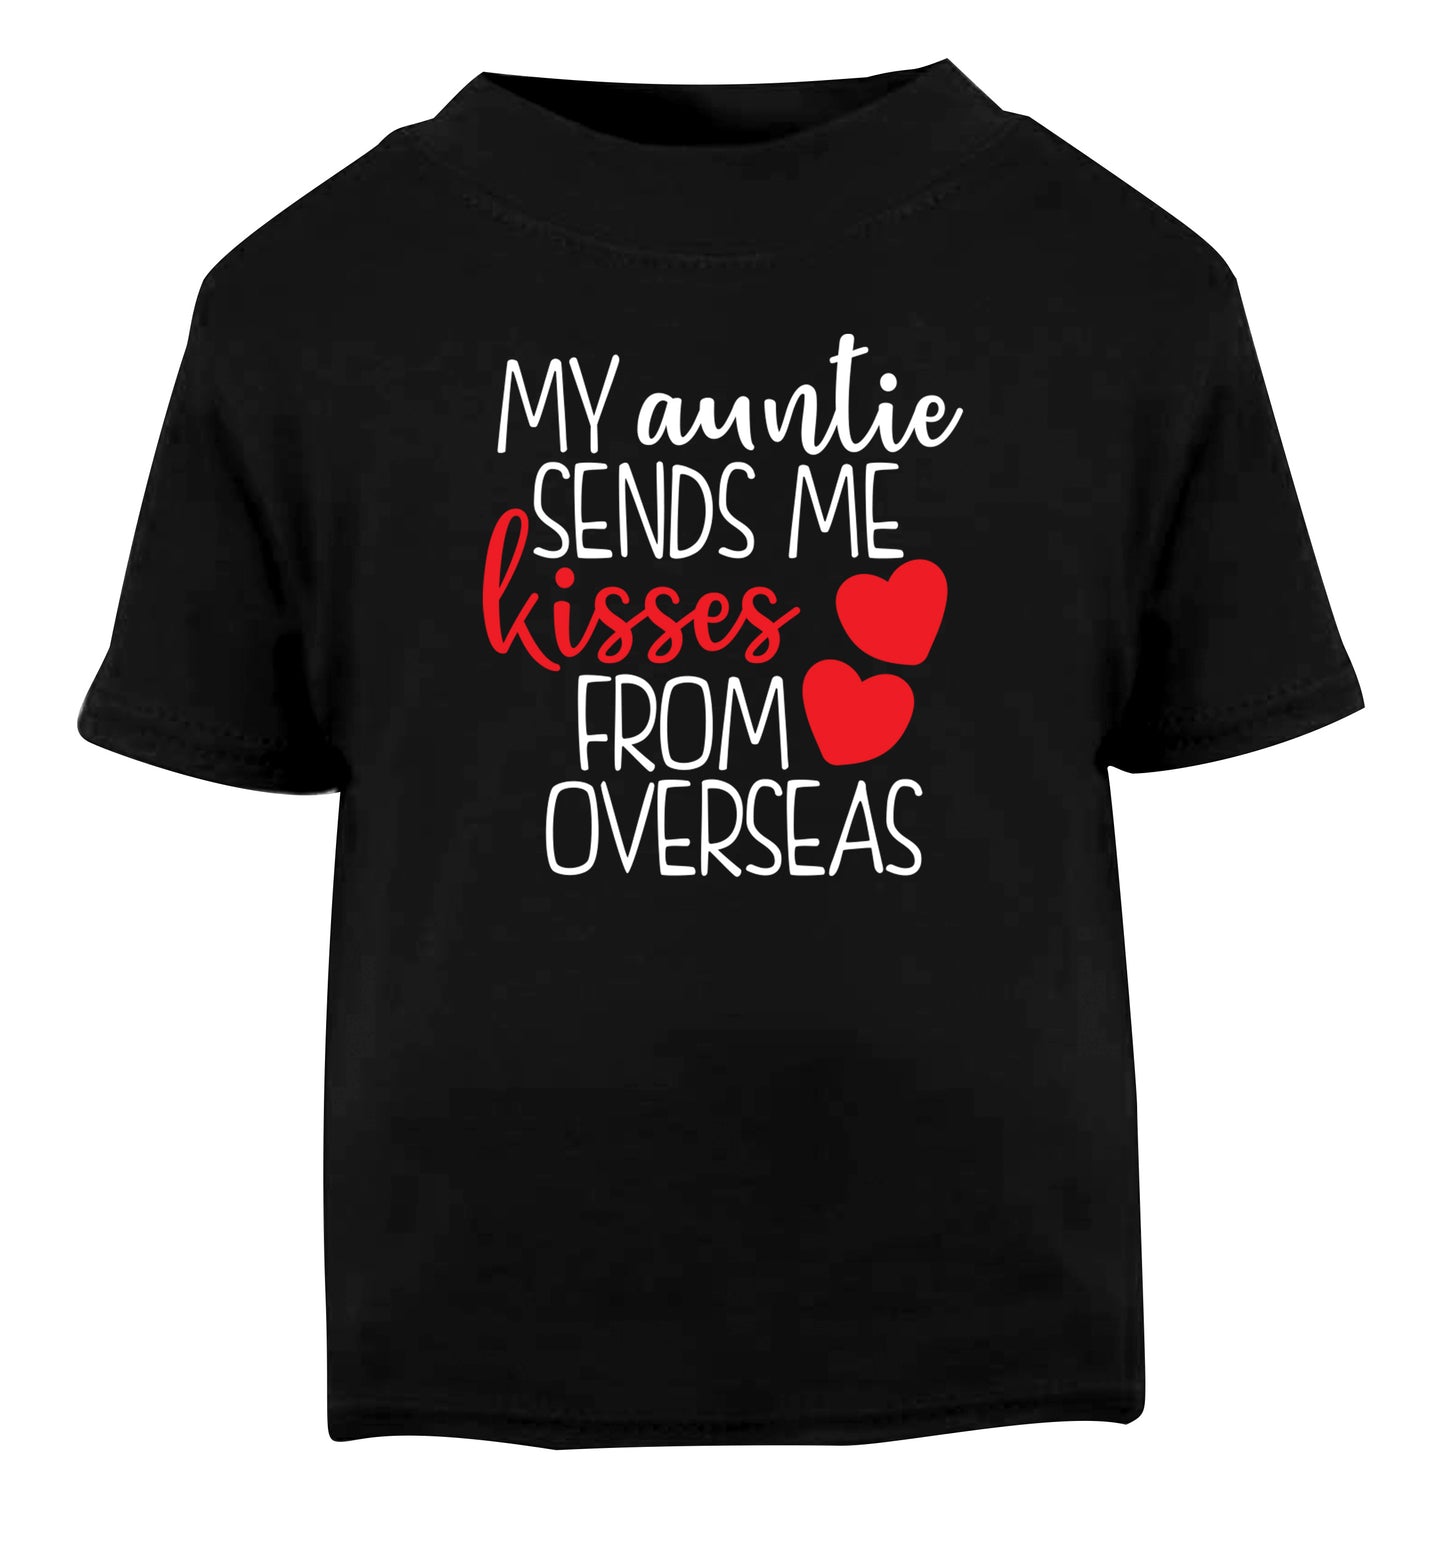 My auntie sends me kisses from overseas Black Baby Toddler Tshirt 2 years